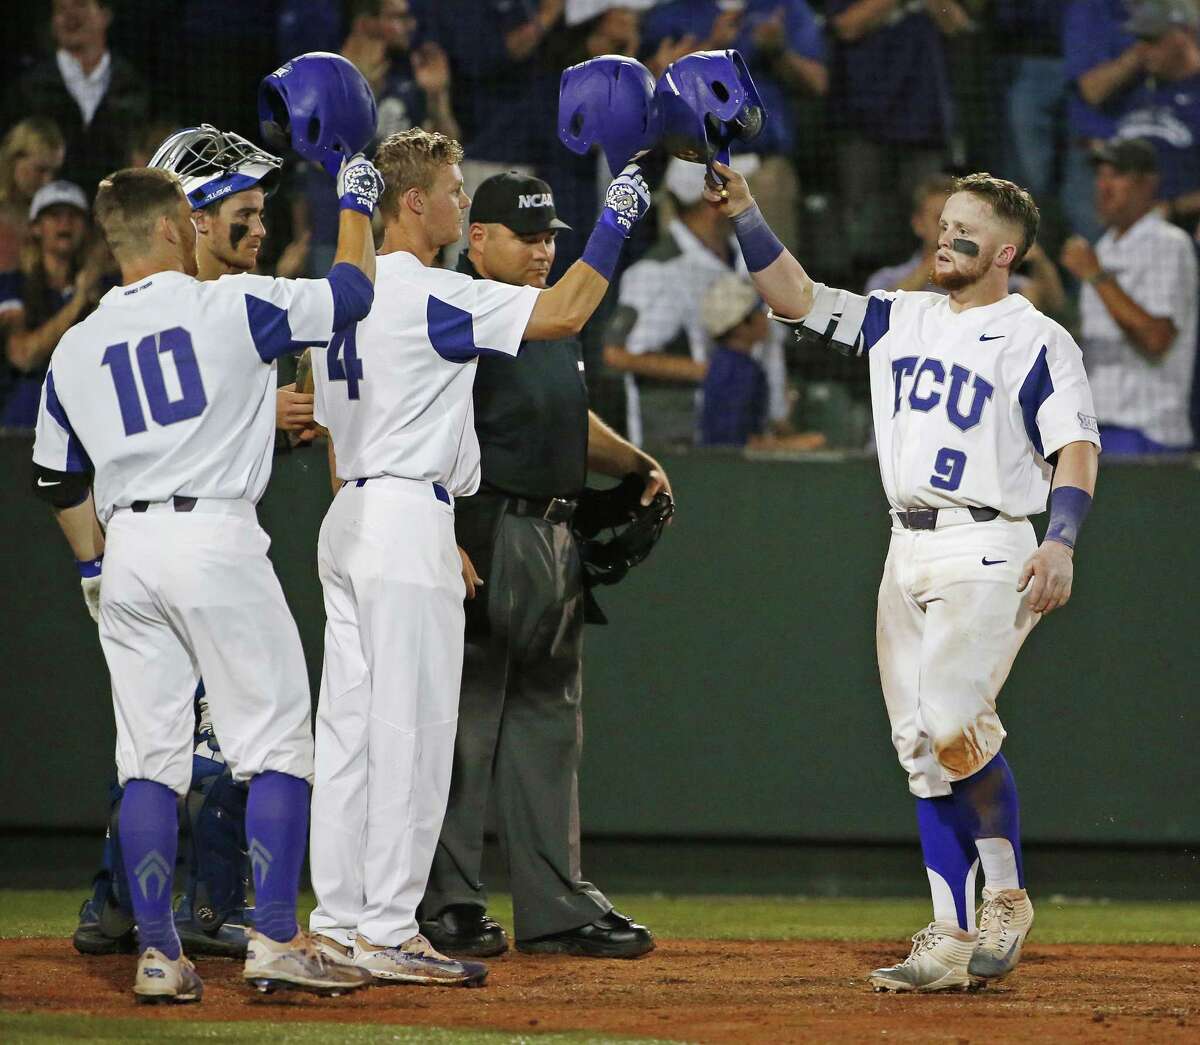 TCU catcher Evan Skoug (9) arrives at home plate after his three-run homer in the eighth inning against Central Connecticut State in an NCAA baseball regional playoff game on June 3, 2017, in Fort Worth.